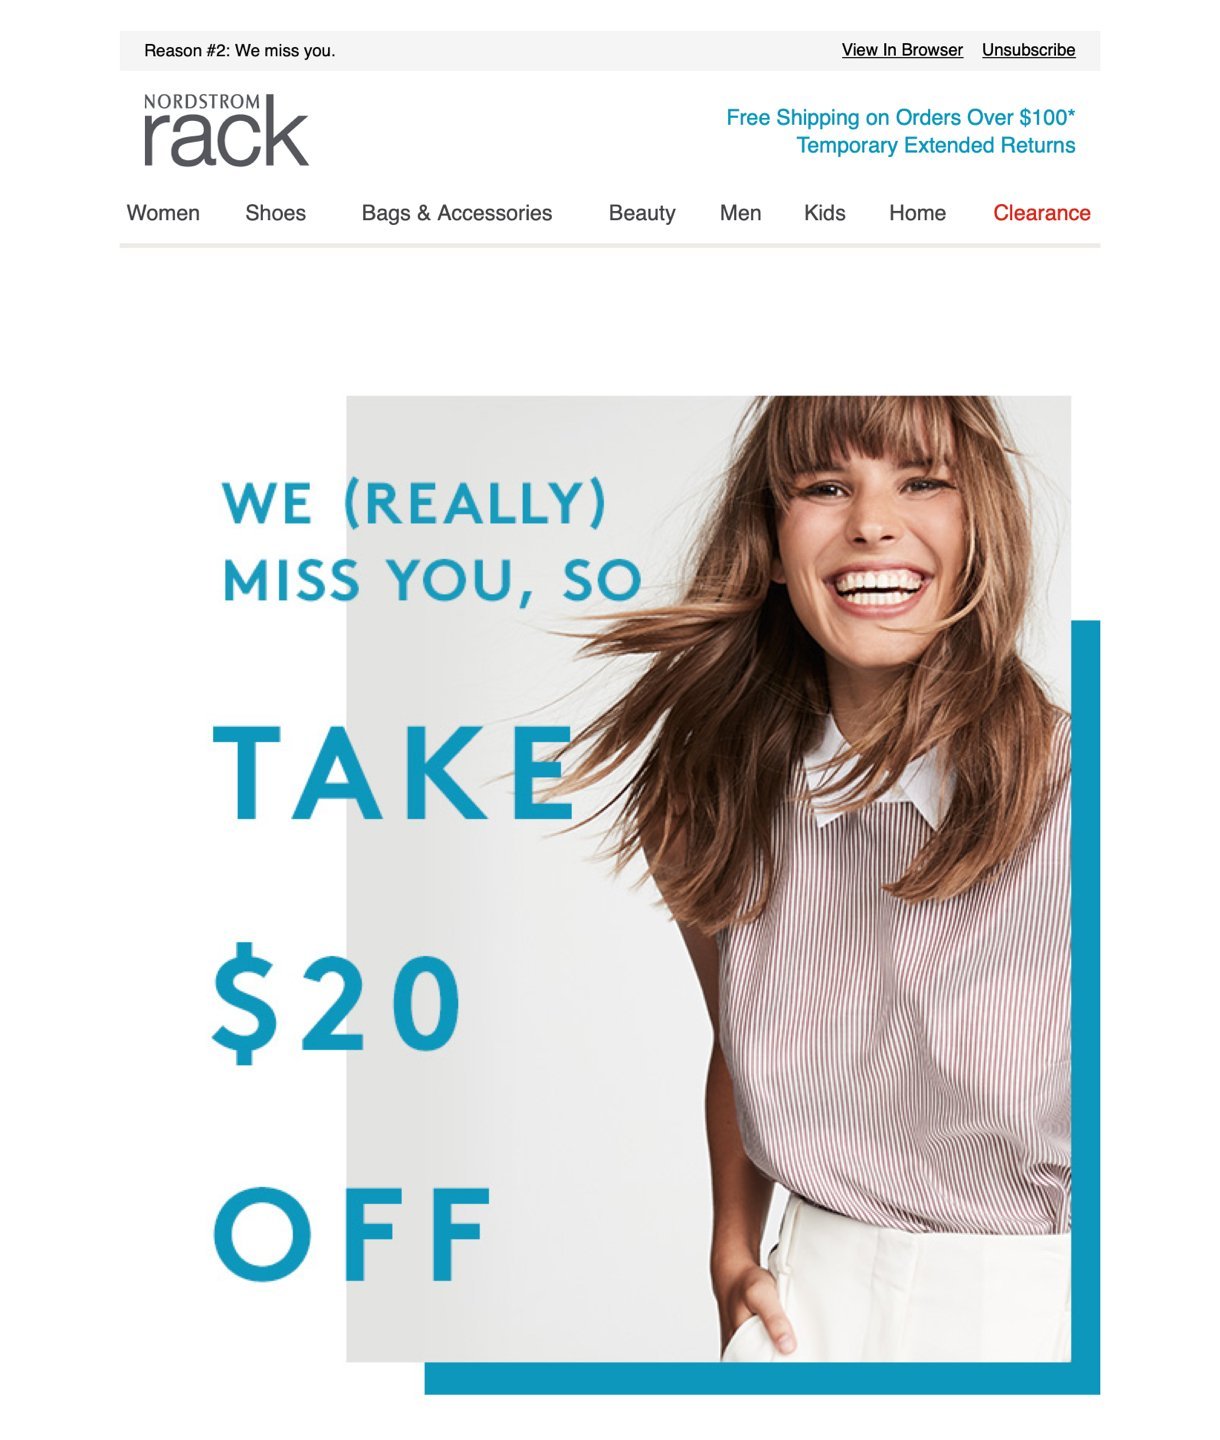 Nordstrom Rack re-engagement campaign discount offer email